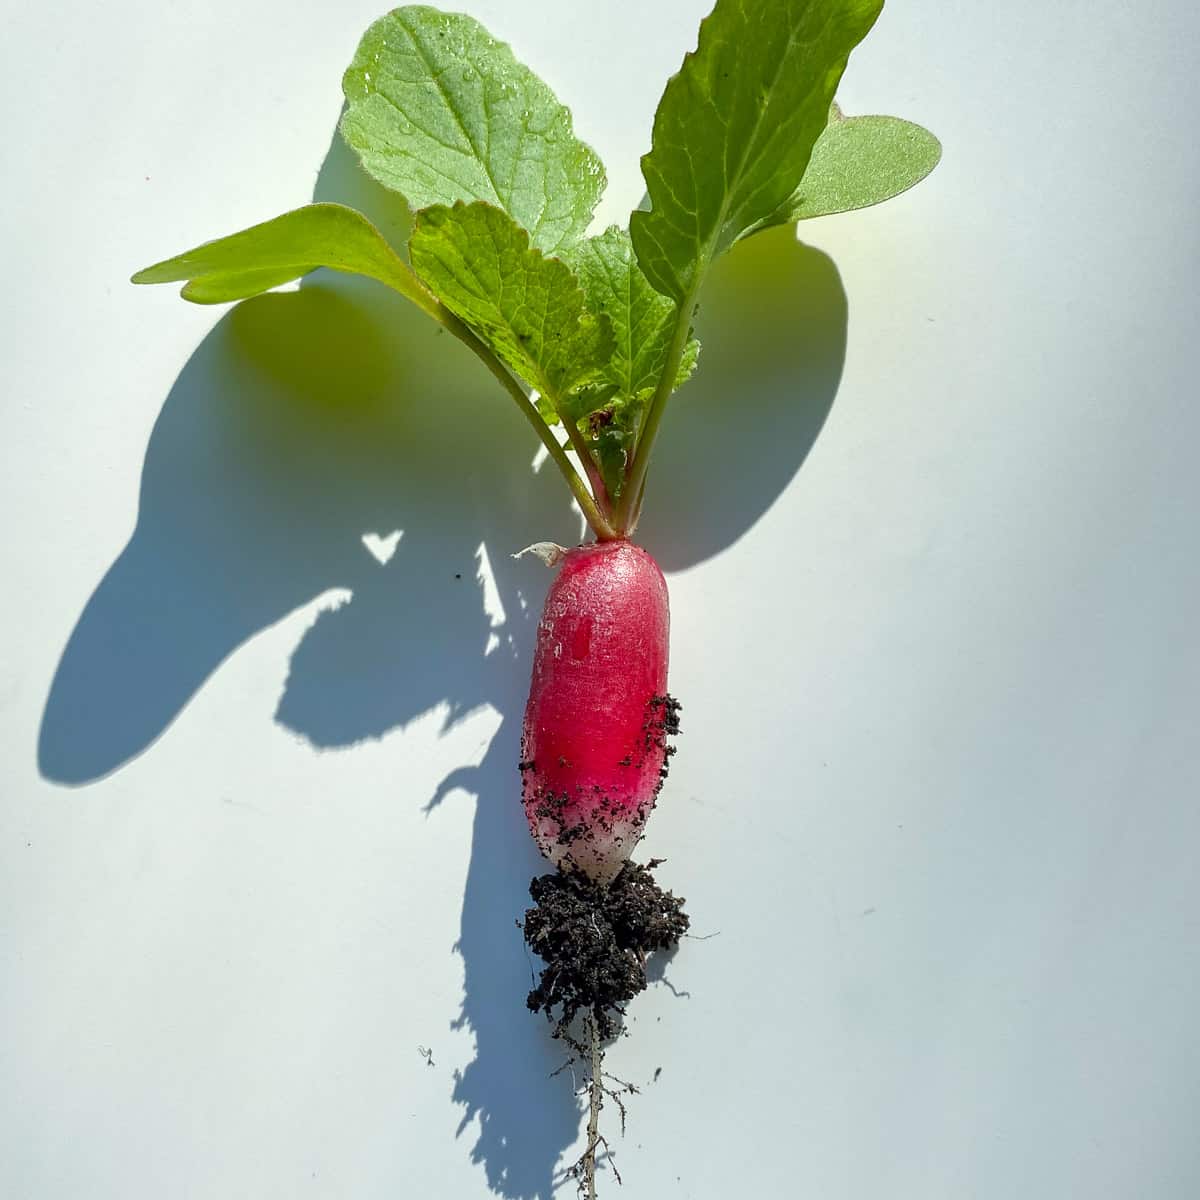 An image of a radish still covered in the soil it was pulled from.